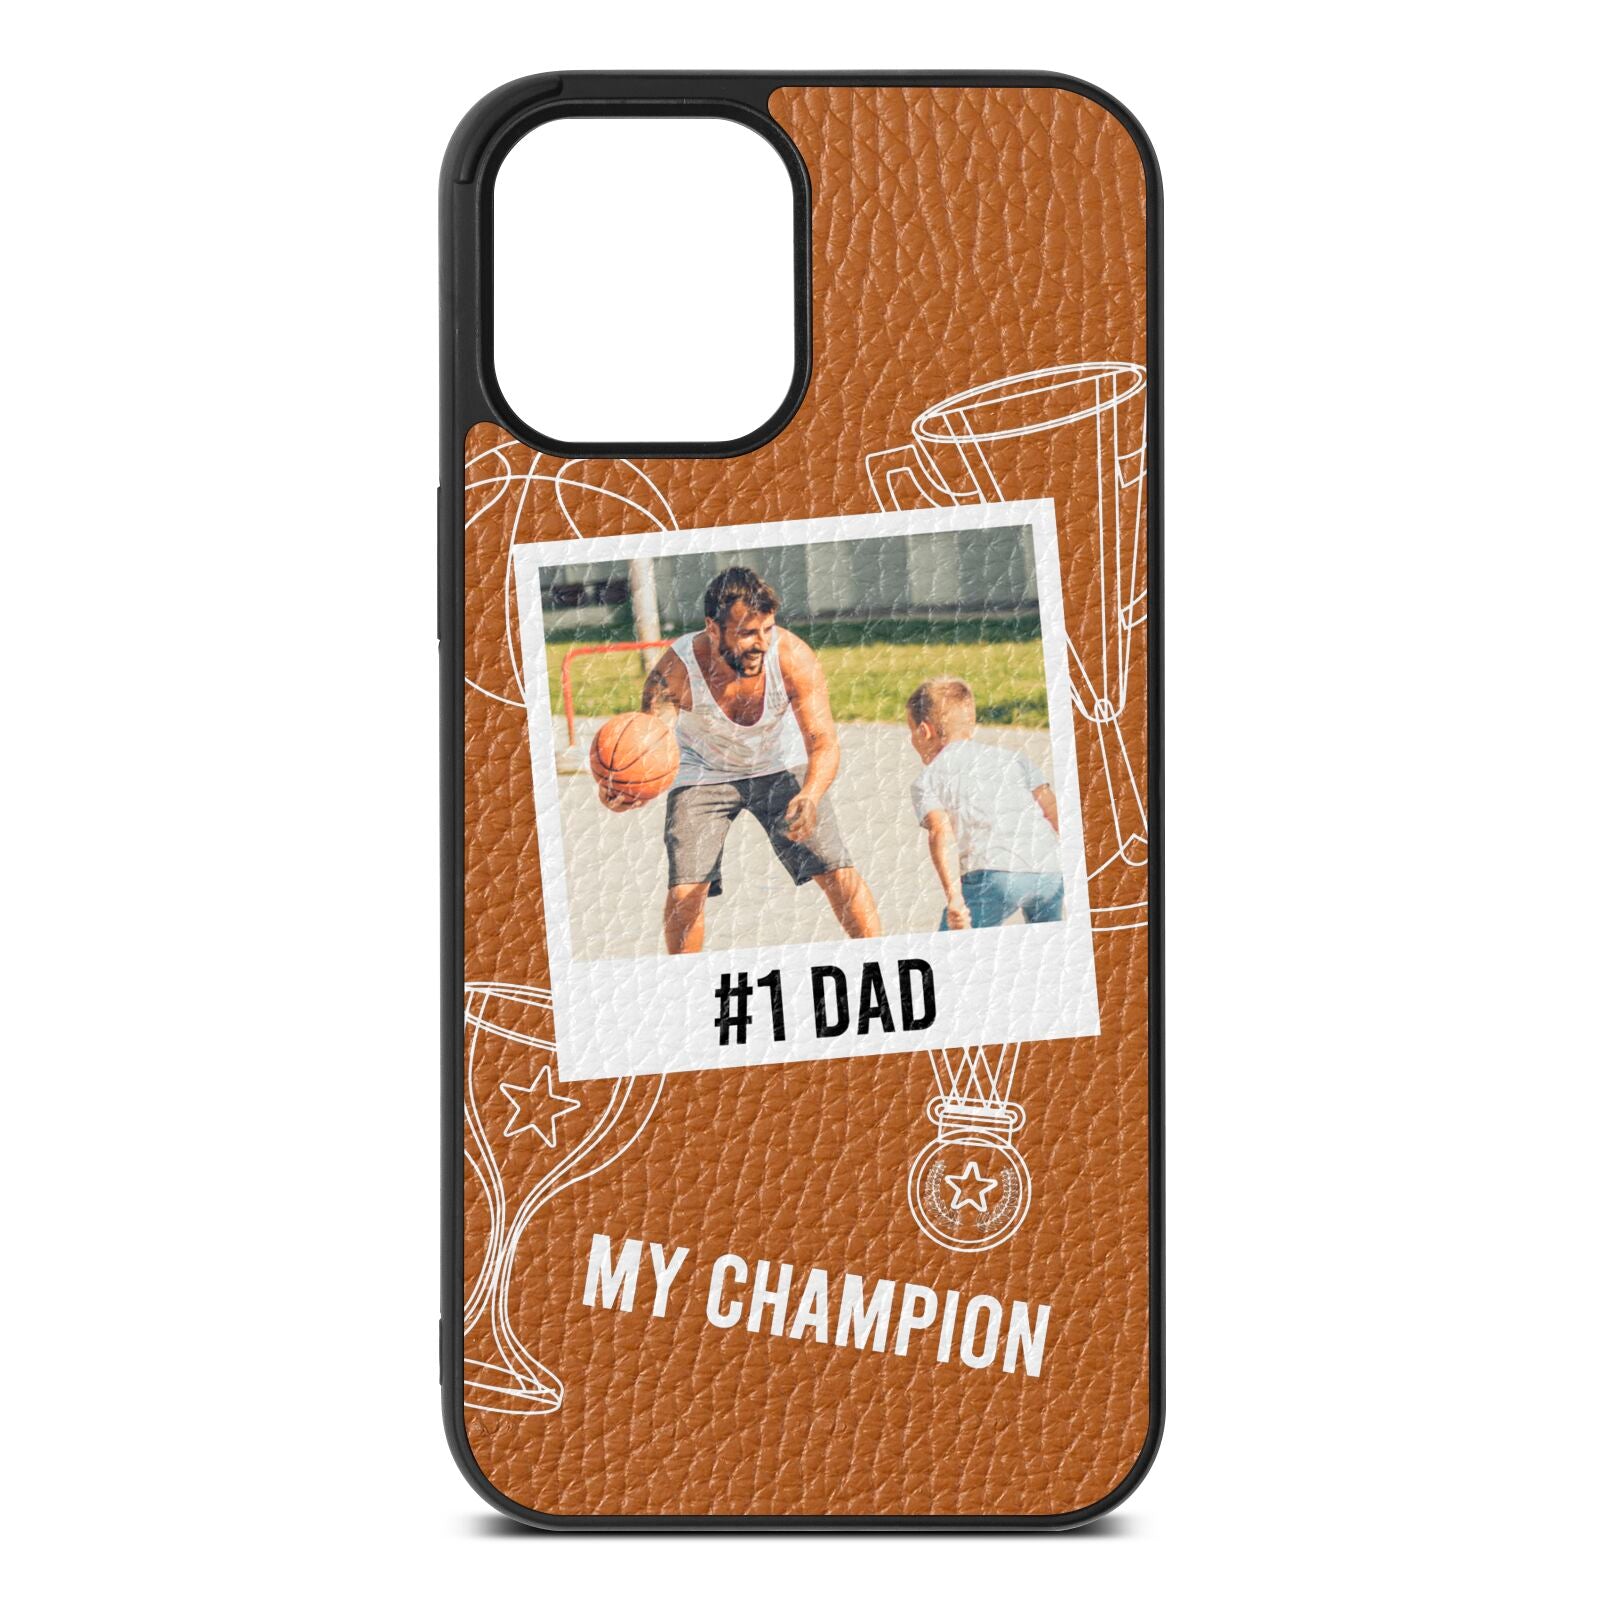 Personalised Number 1 Dad Tan Pebble Leather iPhone 12 Pro Max Case